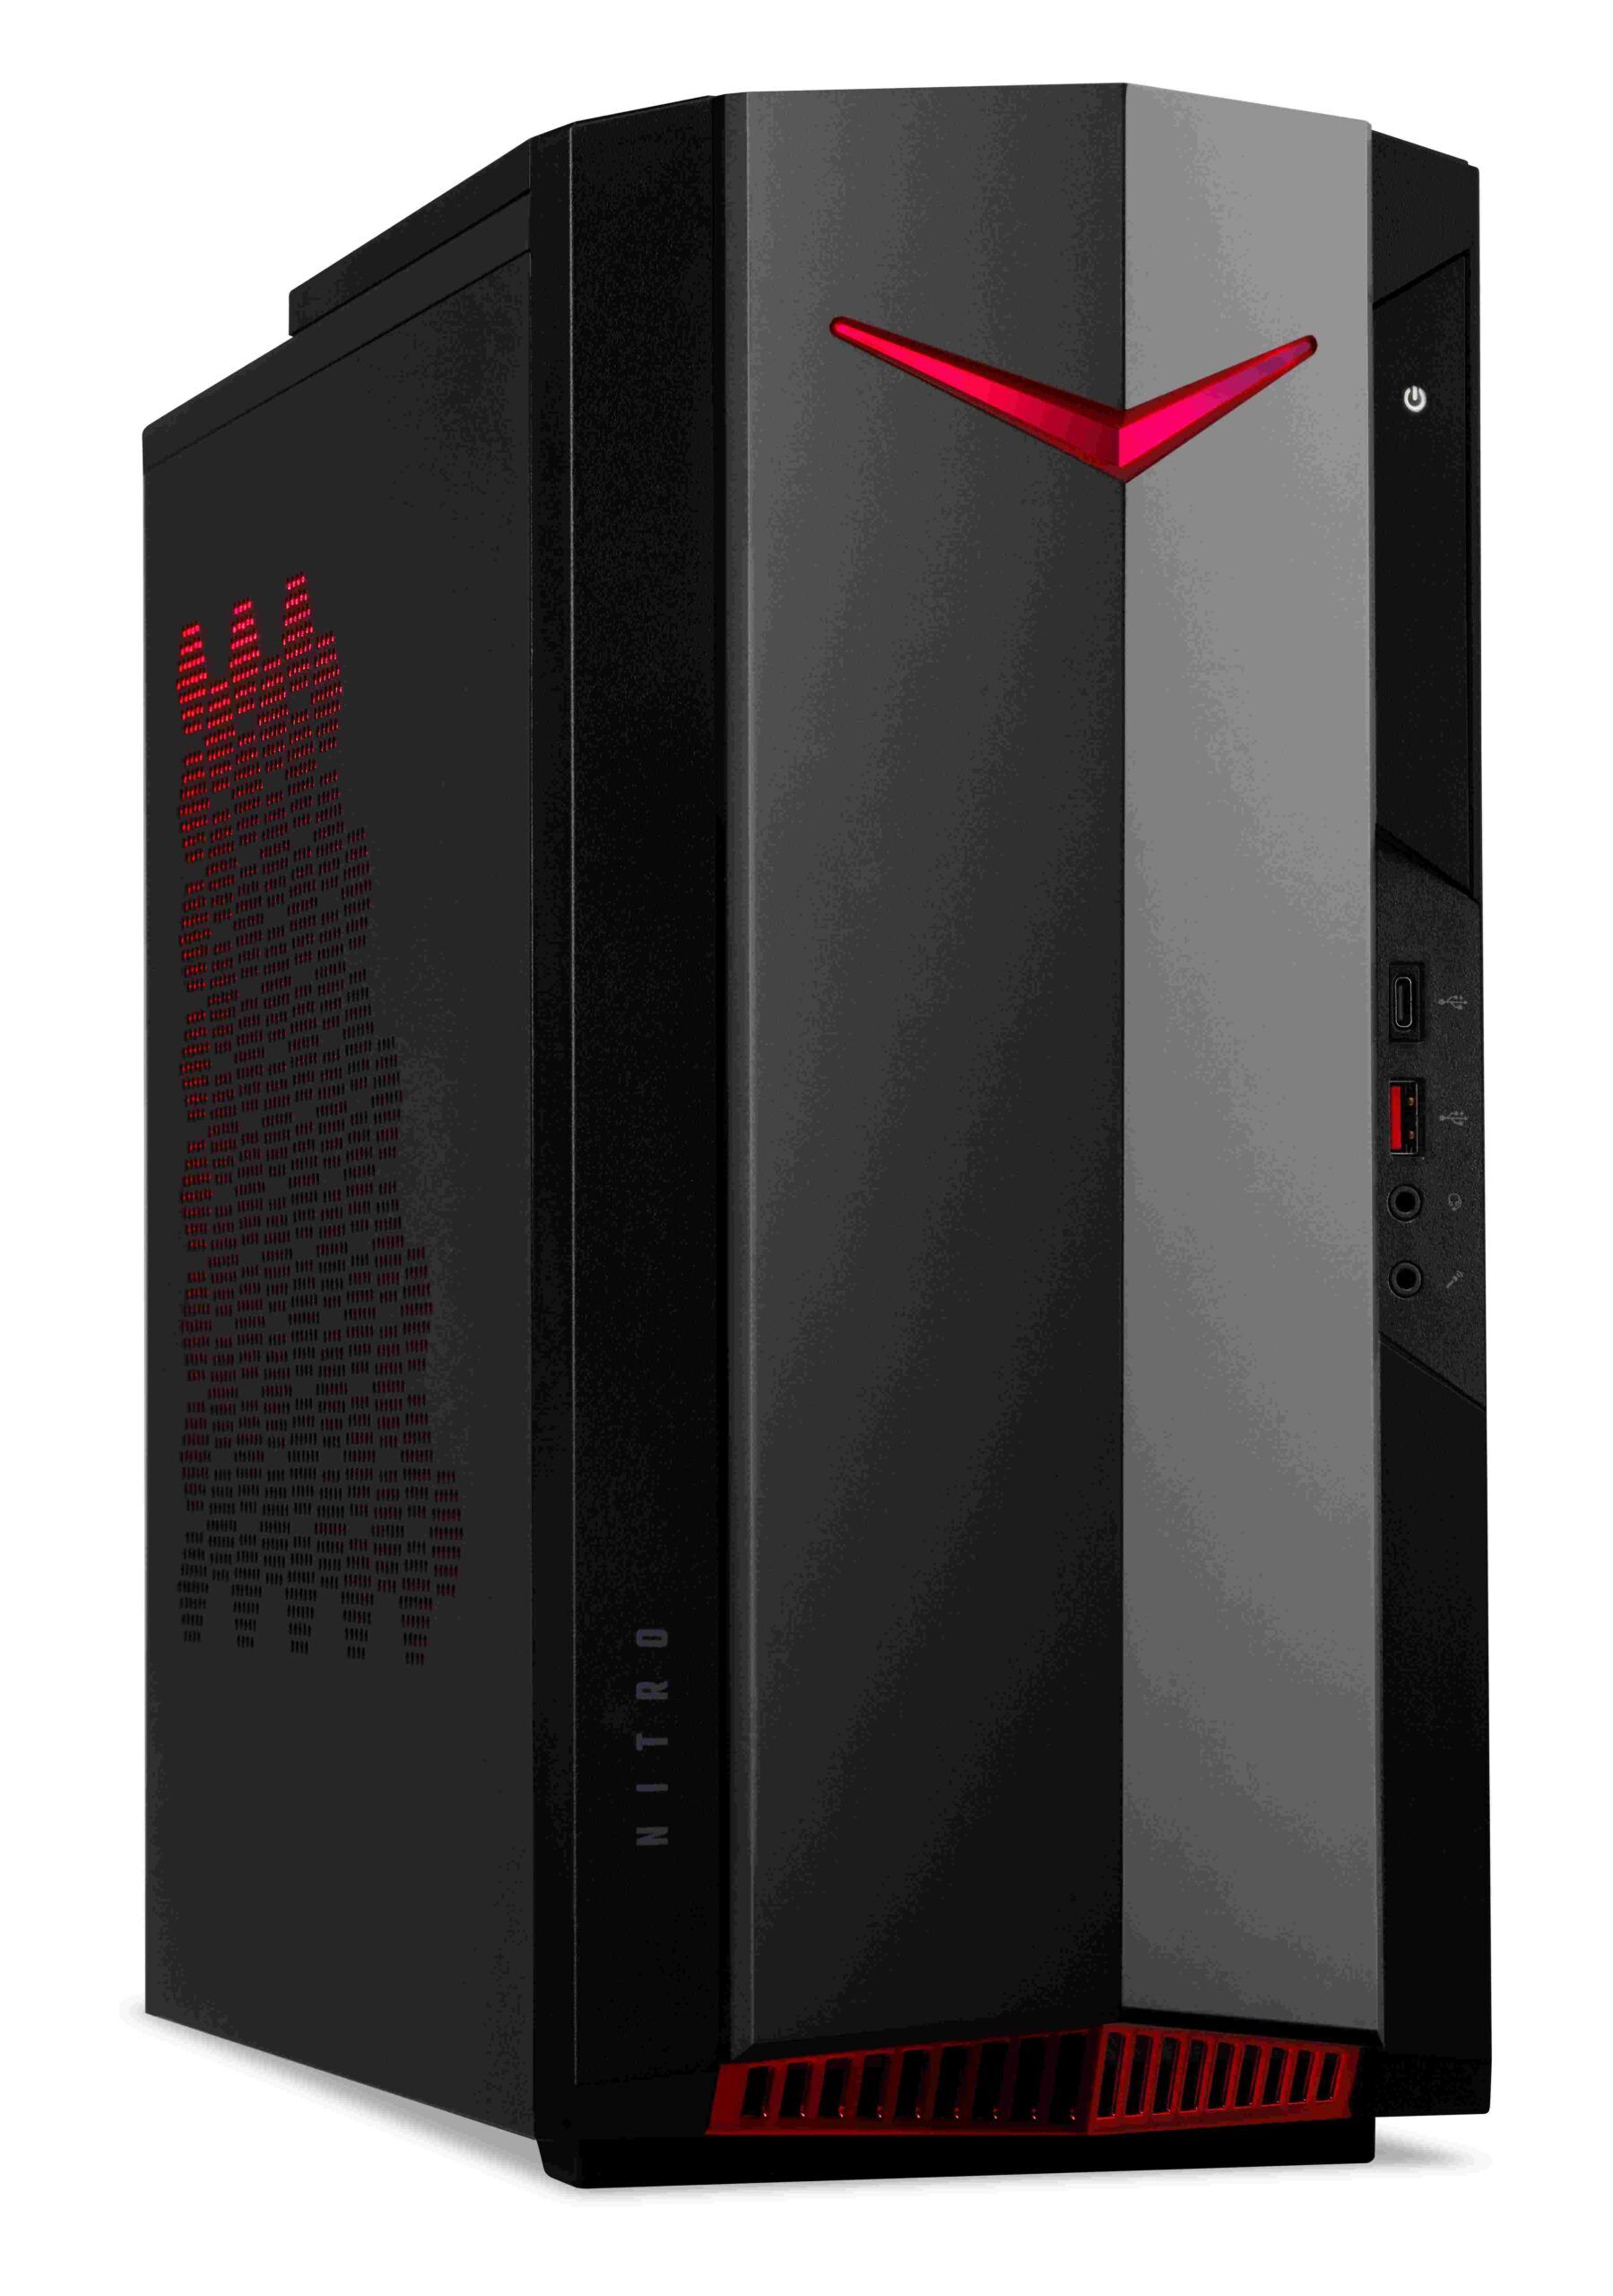 Acer Launched Predator Orion 3000 and Nitro 50 Gaming Desktops